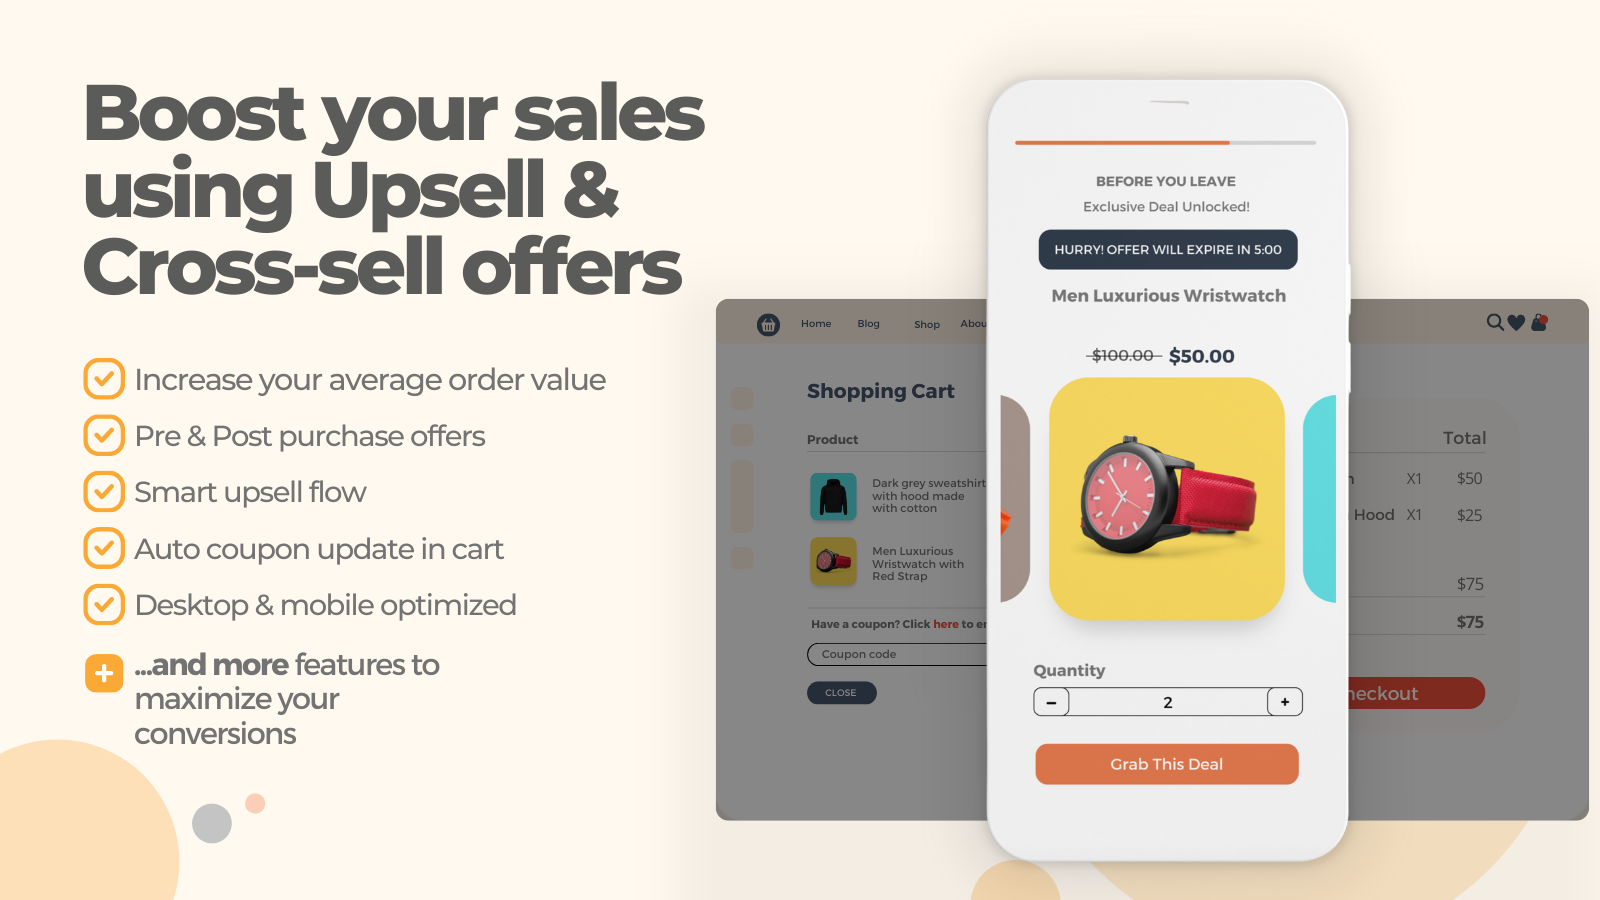 Boost your sales using Upsell & Cross-sell offers